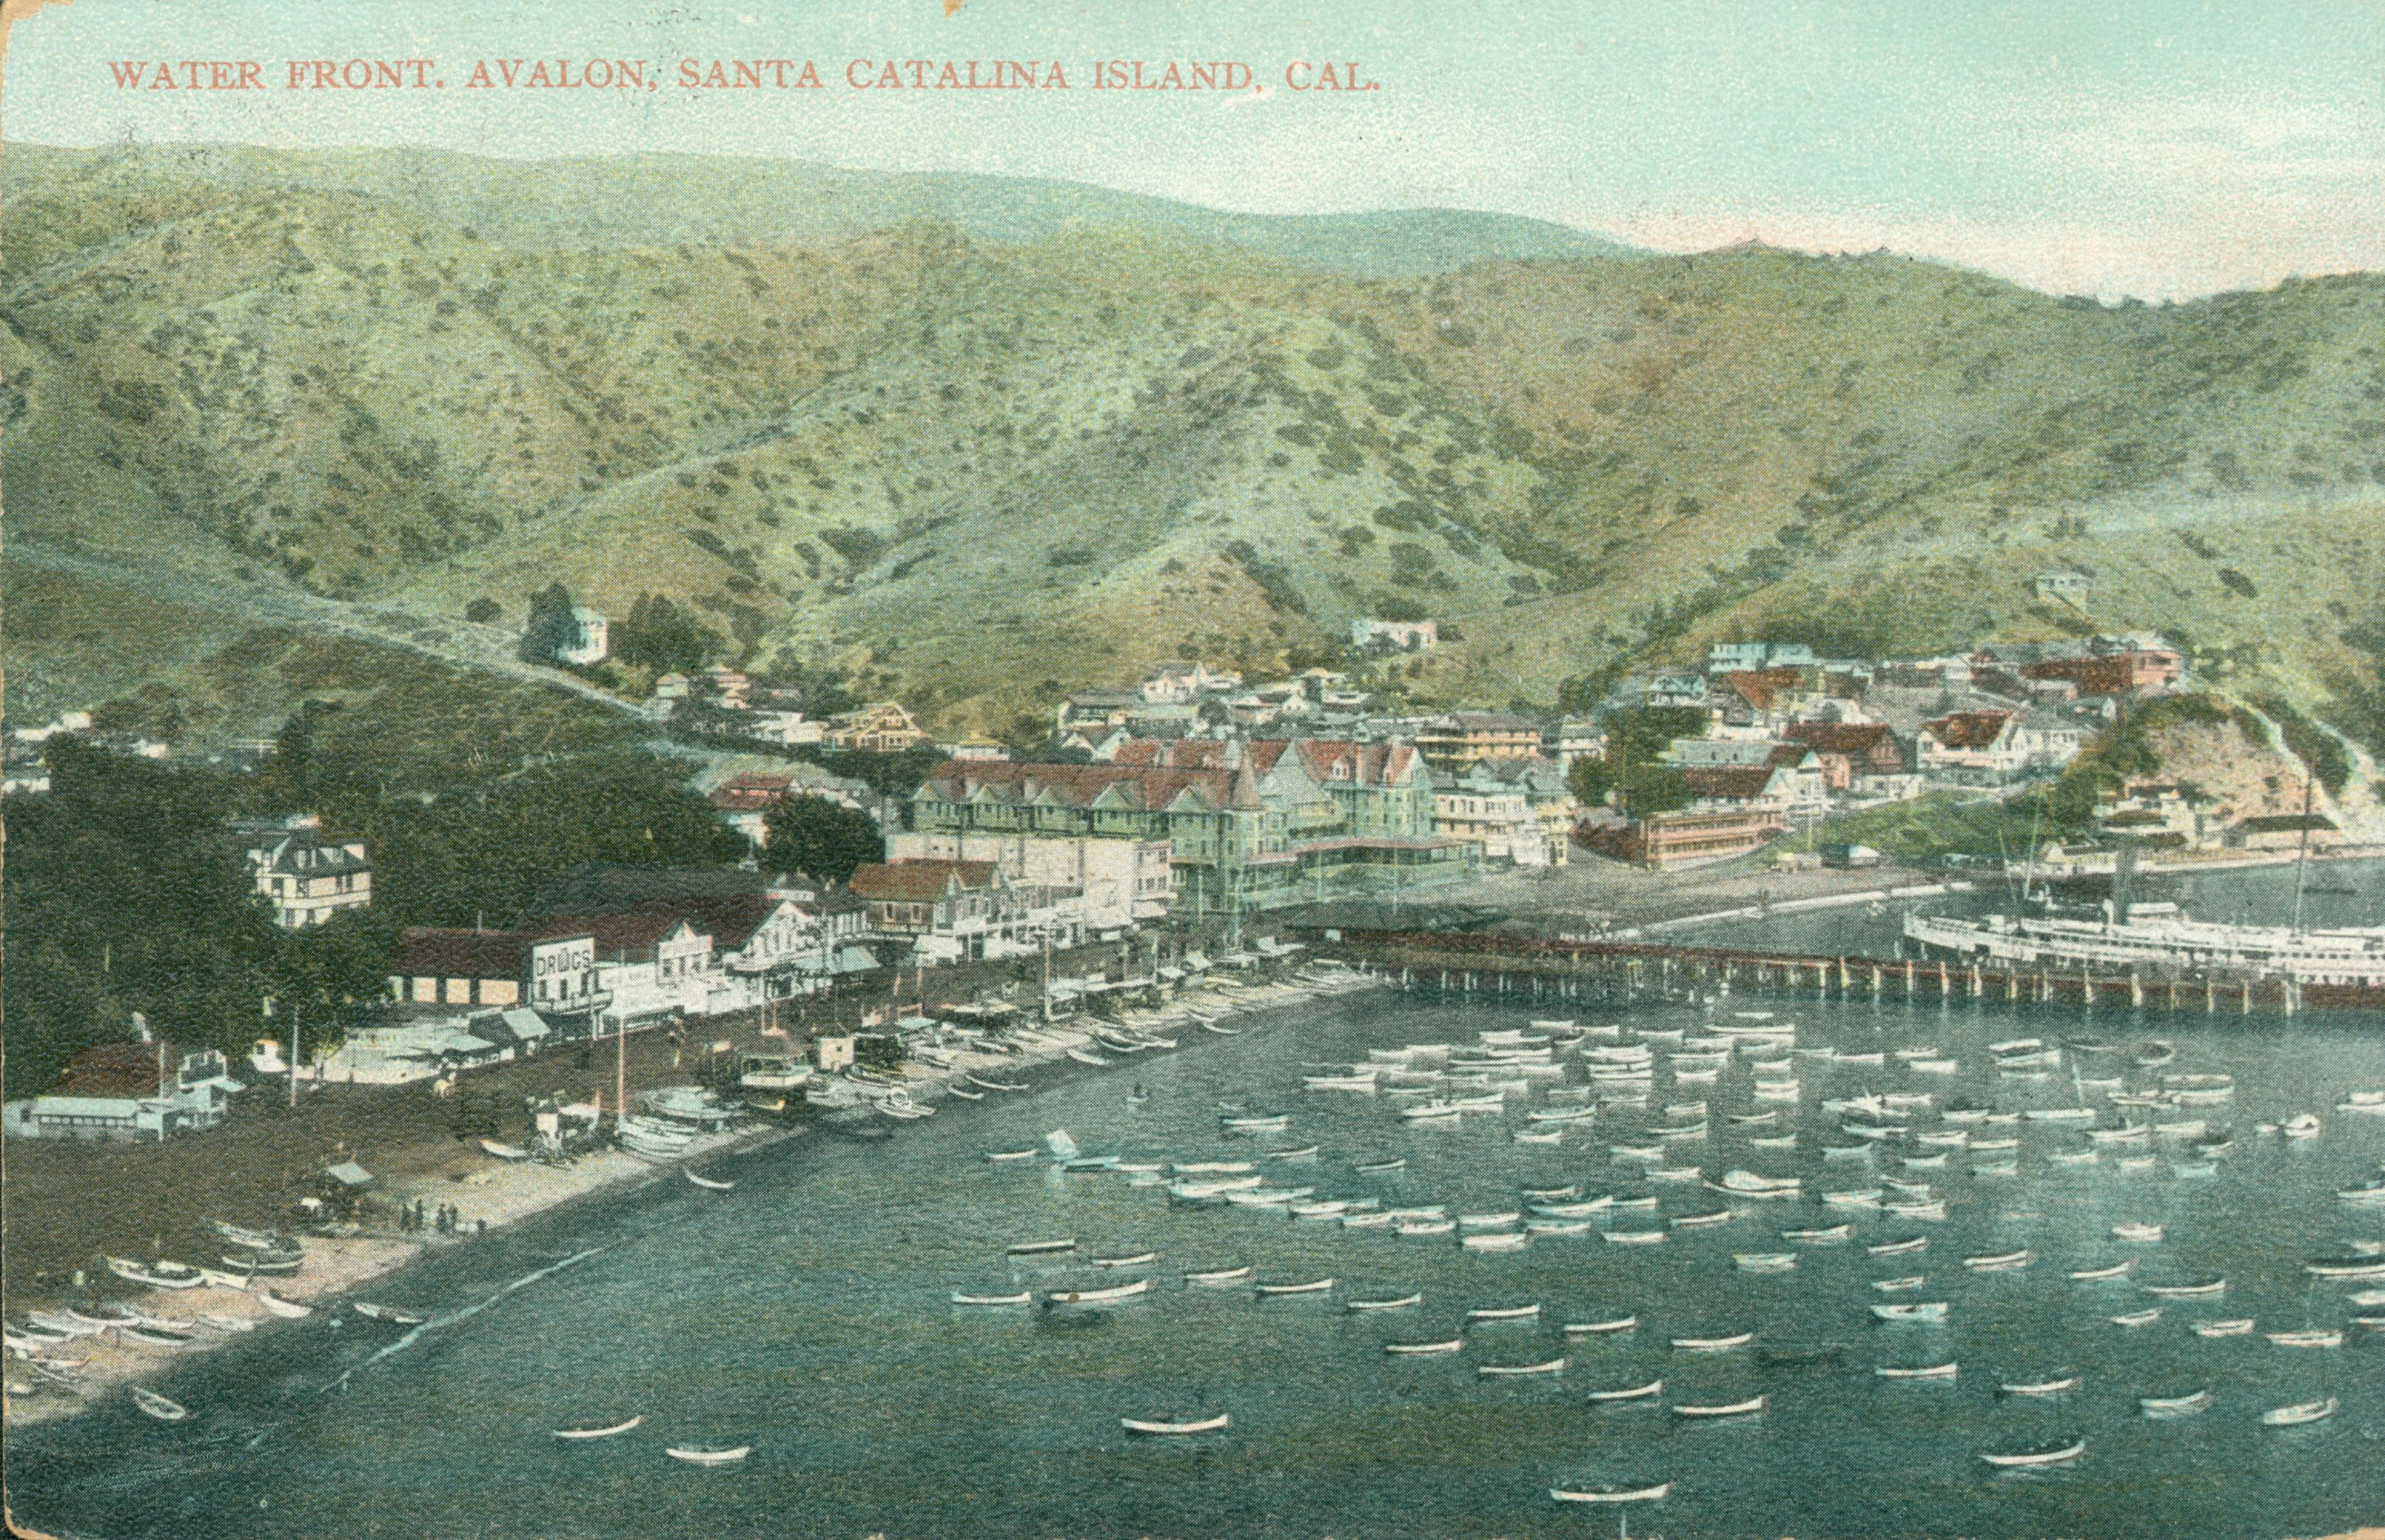 This postcard shows a bird's eye view of Avalon and the harbor on Catalina Island